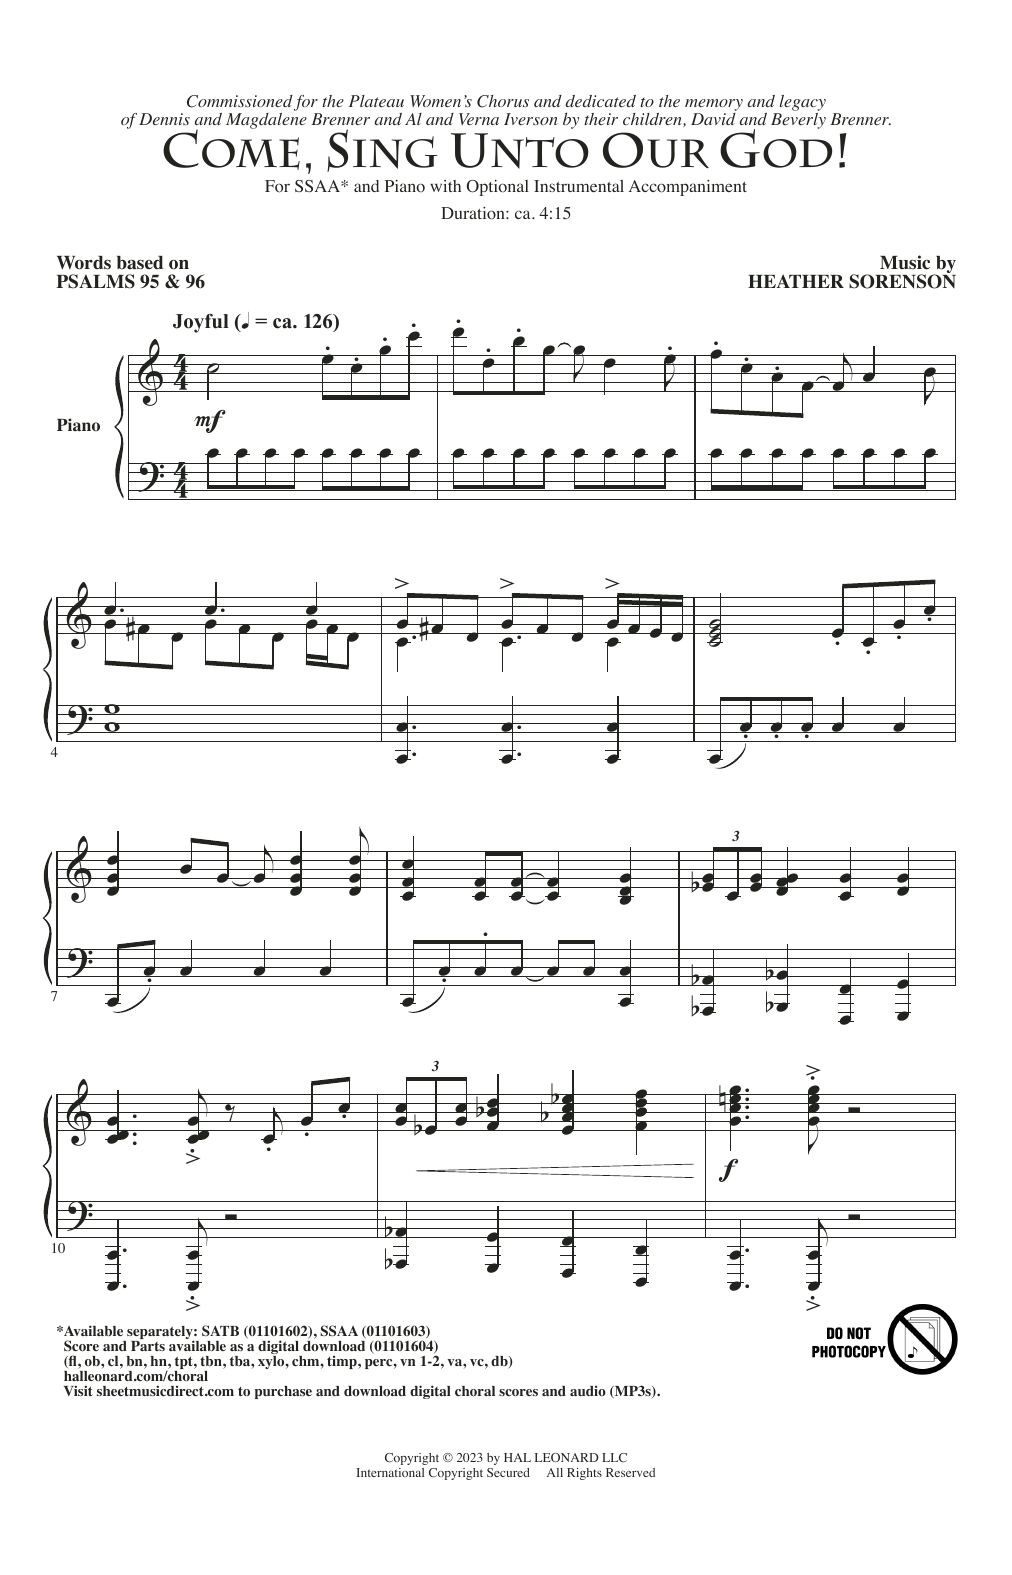 Download Heather Sorenson Come, Sing Unto Our God! Sheet Music